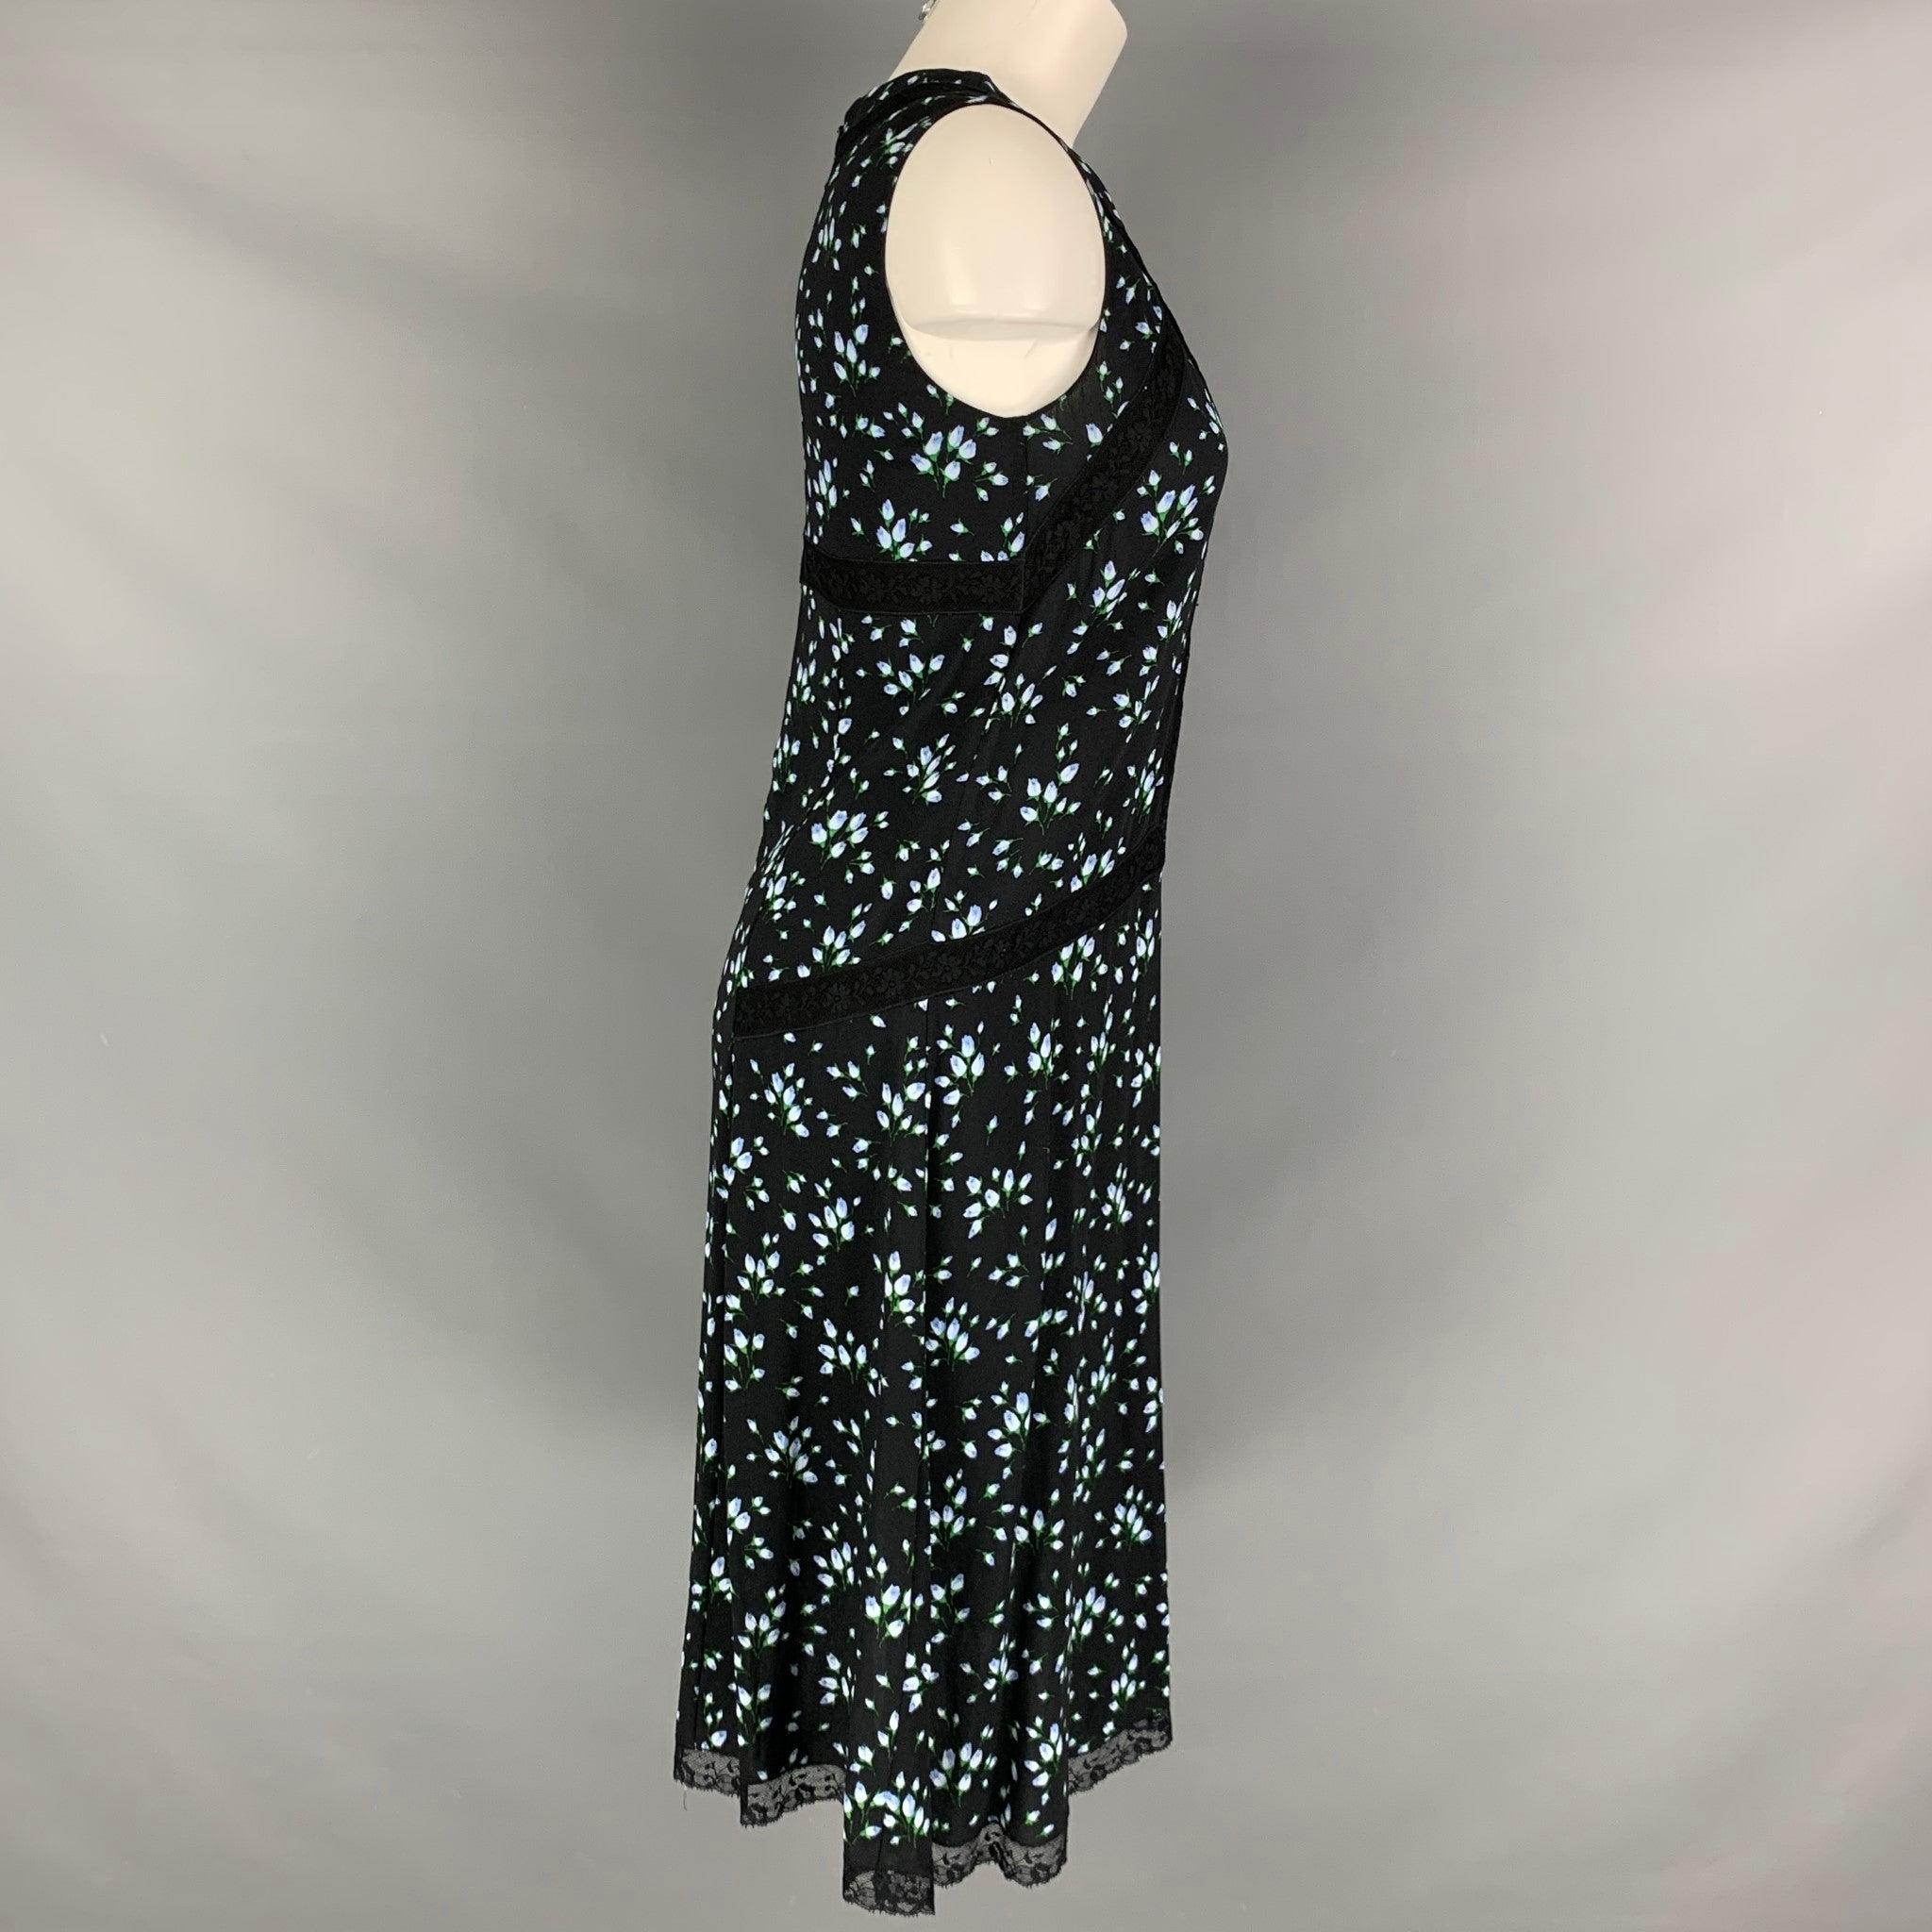 PRADA dress comes in a black, blue and green floral viscose and elastane woven material featuring a black lace details, V-neck, and a sleeveless style. Excellent Pre-Owned Condition. 

Marked:  38 

Measurements: 
 Bust: 34 inches Waist: 32 inches